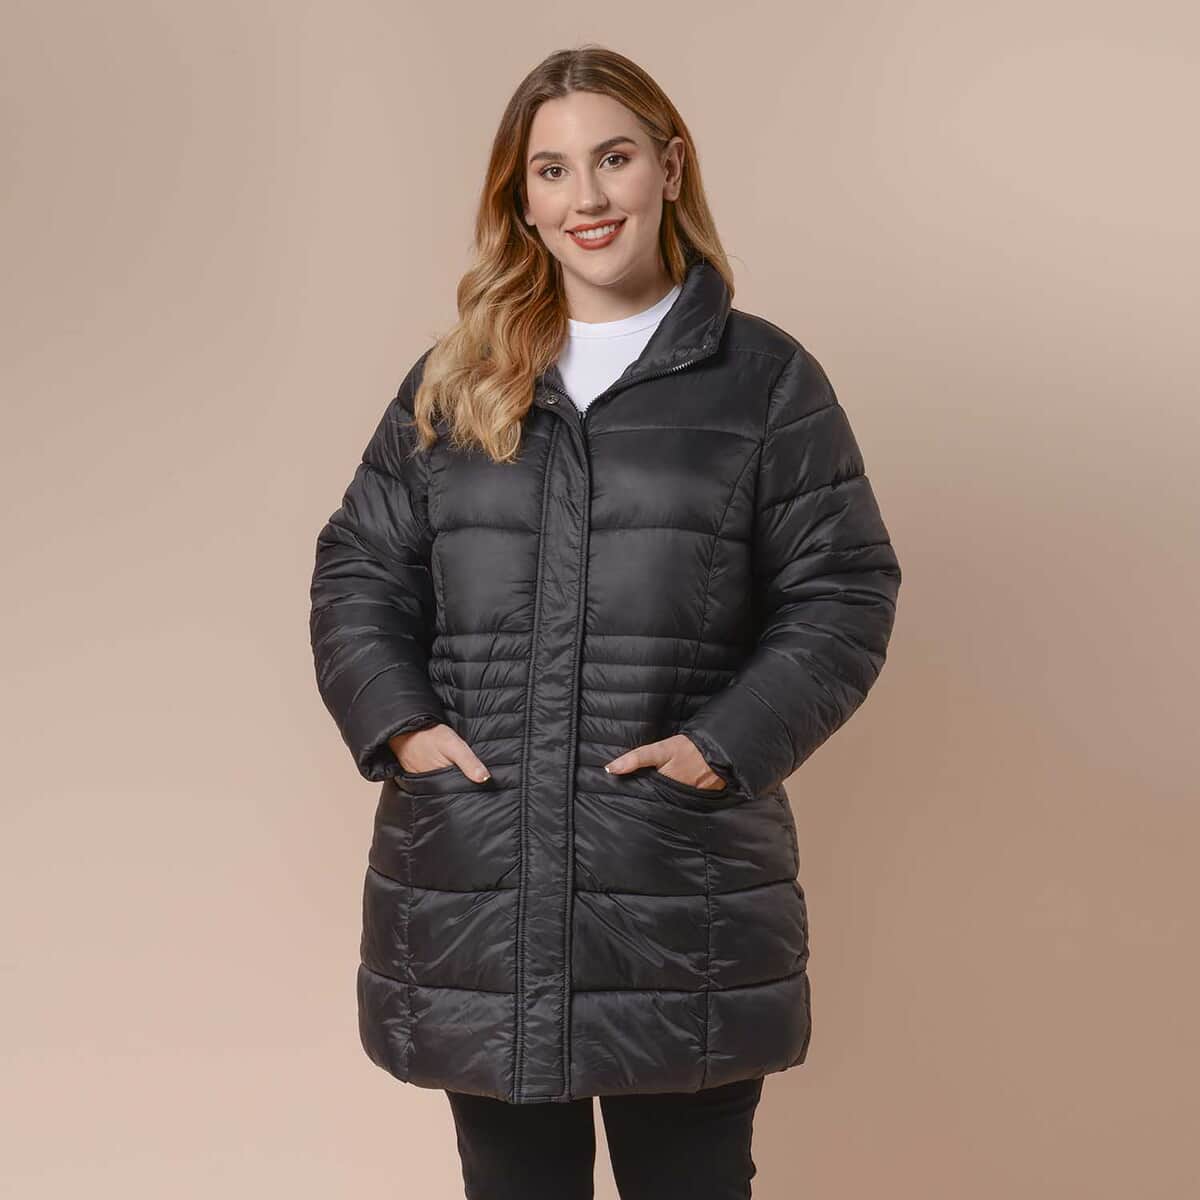 Doorbuster PASSAGE Black Long Sleeve Women Coat with 2 Zipper Pocket (S, Shell: 100% Nylon and Lining: 100% Polyester) image number 0